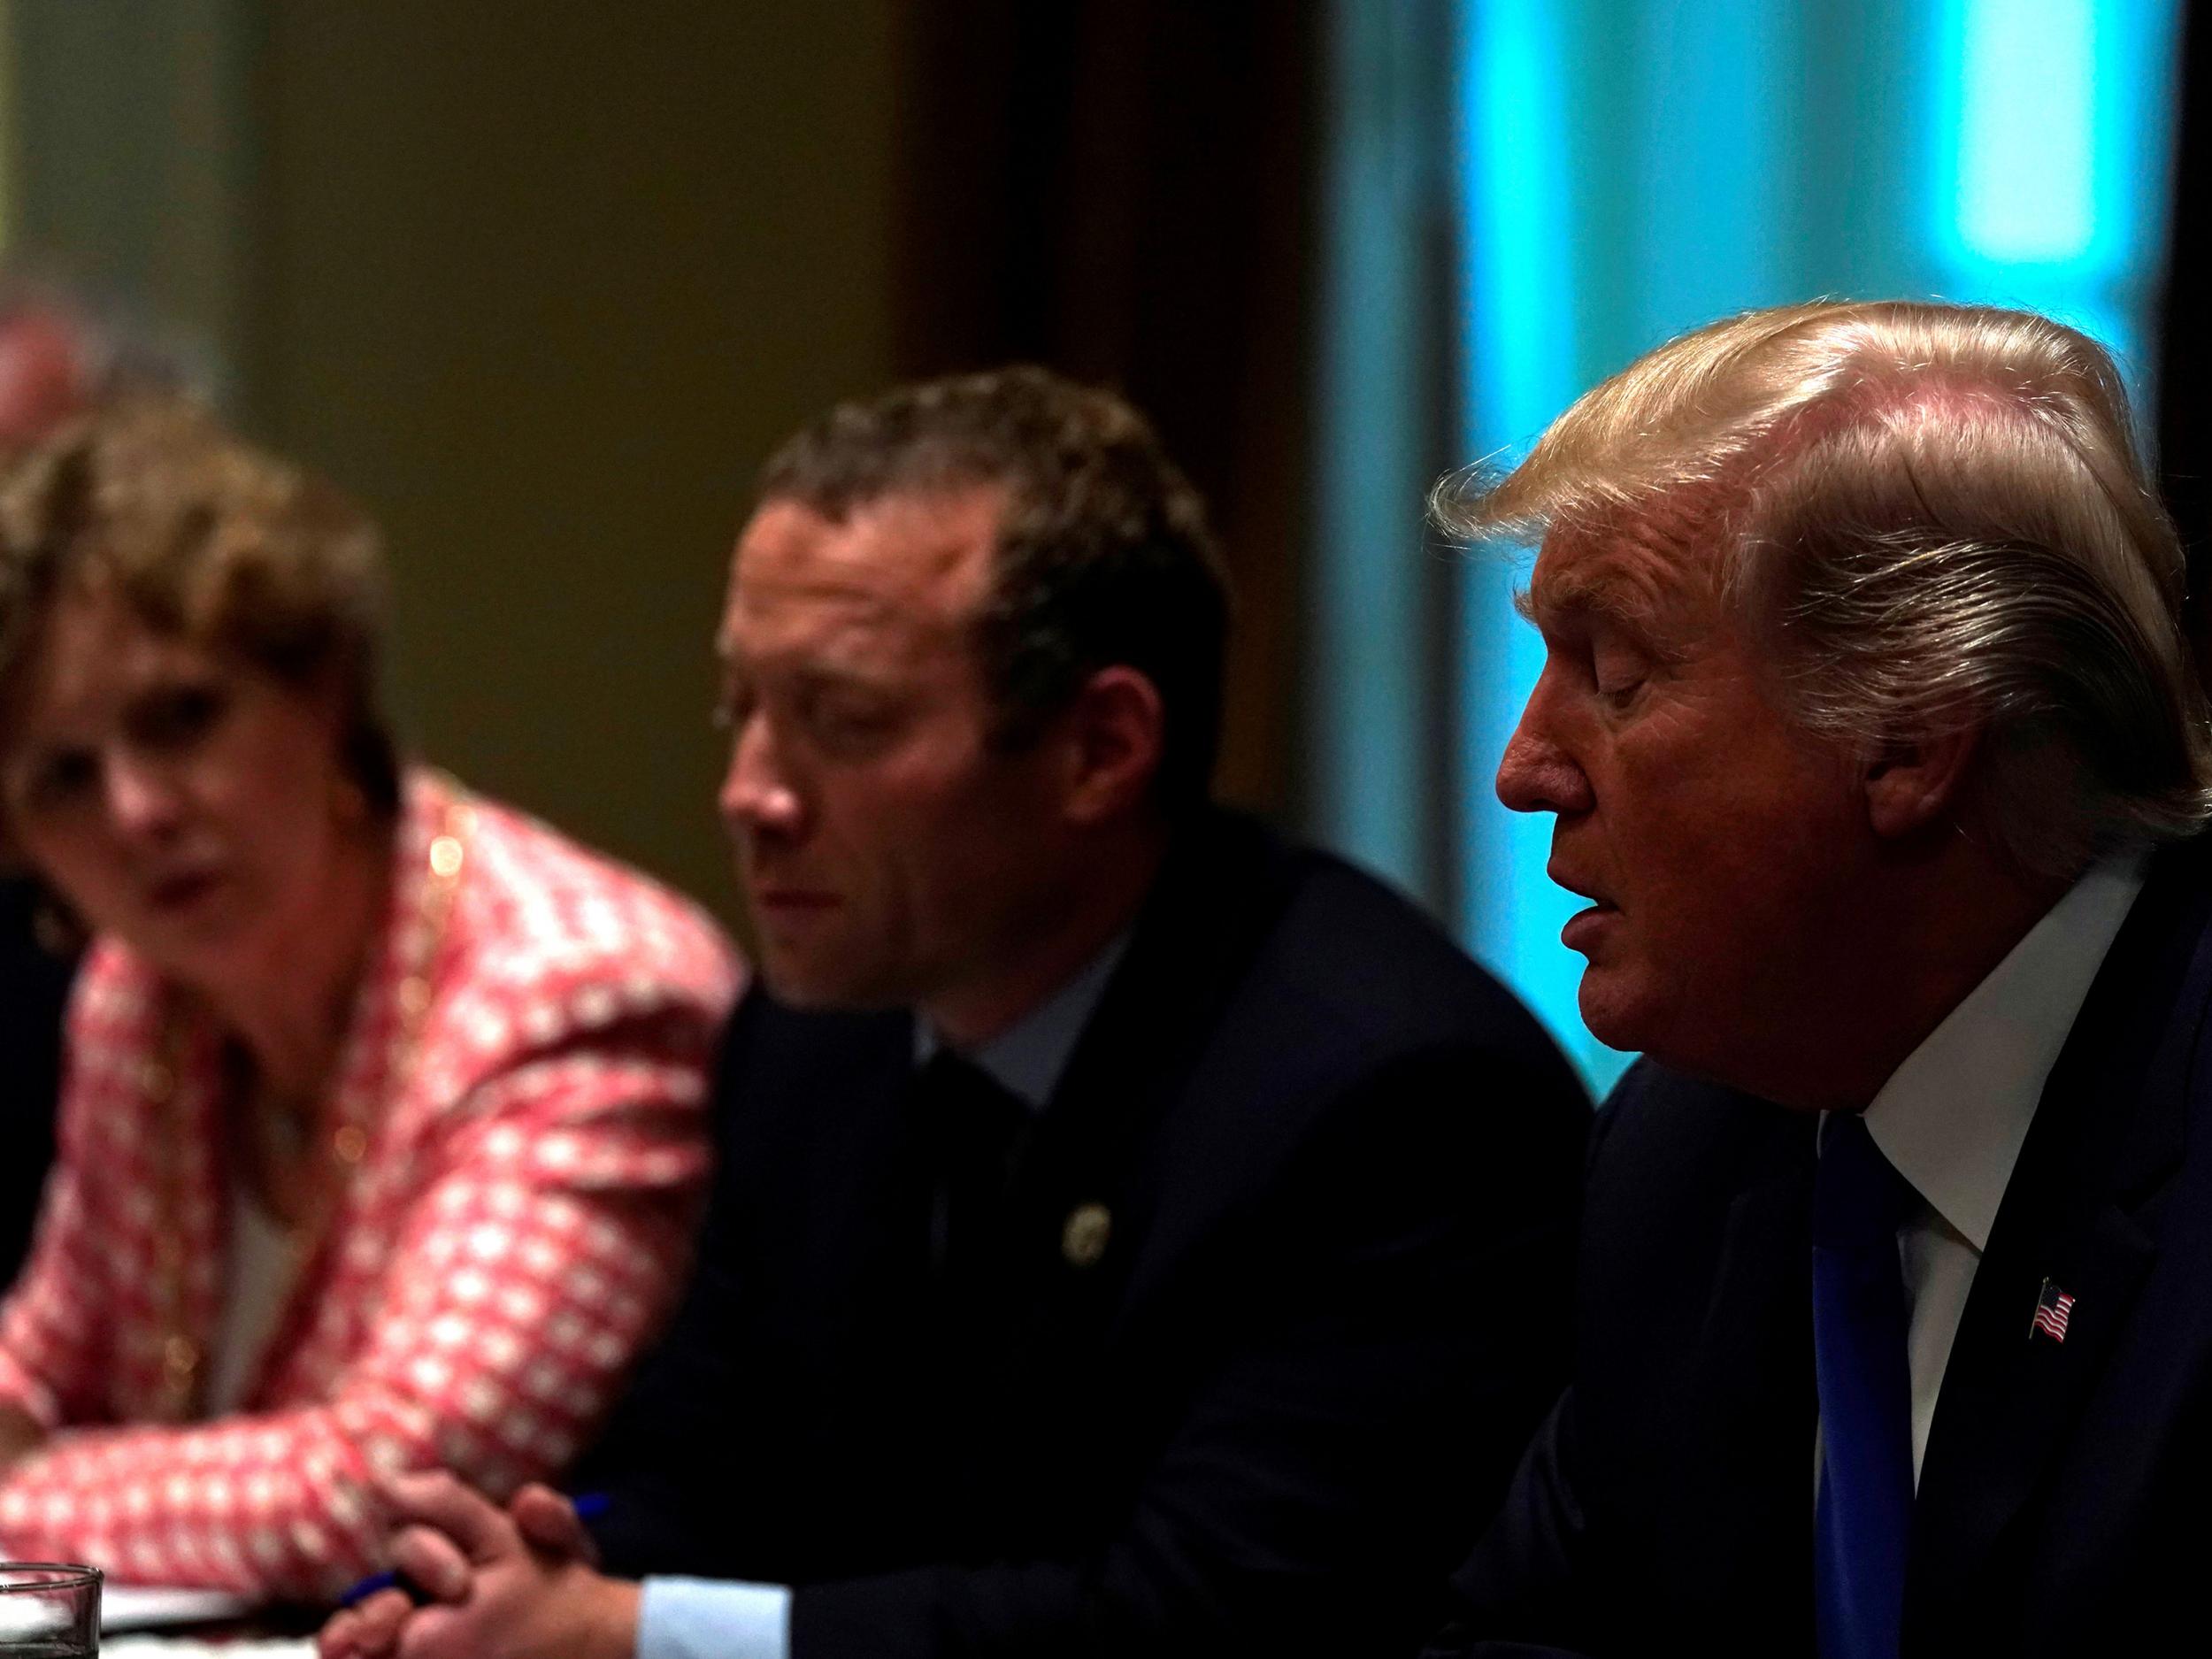 US President Donald Trump meets with a bipartisan group of members of Congress, including US Representative Susan Brooks (Republican-Indiana) and Representative Josh Gottheimer (Democrat-New Jersey) at the White House in Washington